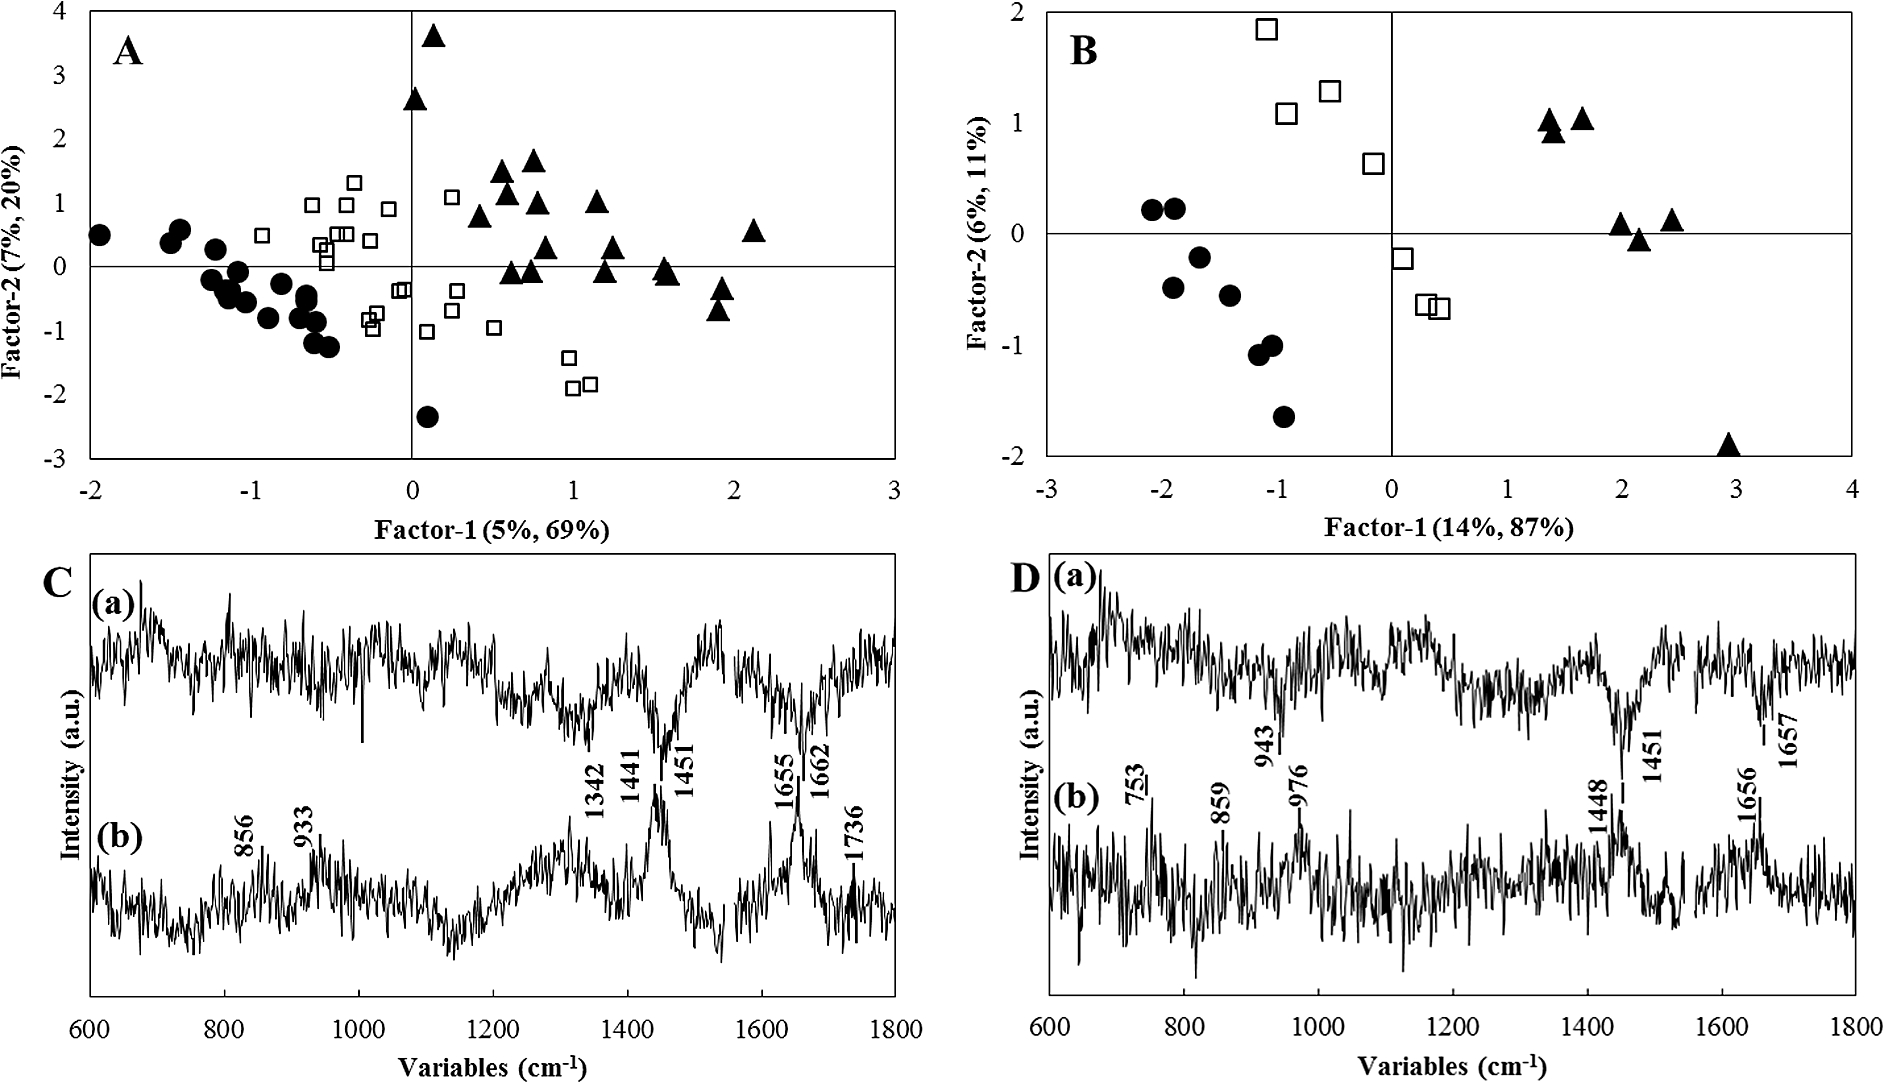 Score and loading plots for factors 1 and 2 of the PLSR models obtained for the spectra measured in 3 tumor mouse models (A and C) and a single tumor mouse model (B and D) of the symbols ●, □, and ▲ represent the spectral data measured at 15, 17, and 19 weeks of age, respectively. The Raman spectra were measured at several tumor lesions in the mouse; for the 3 tumor mouse models, the total number of spectra measured were 19, 24, and 19 corresponding to 15, 17, and 19 weeks, respectively; for the single tumor mouse model, the total number of spectra were 8, 7, and 7 for 15, 17, and 19 weeks, respectively. (Reproduced from the reference [25].)